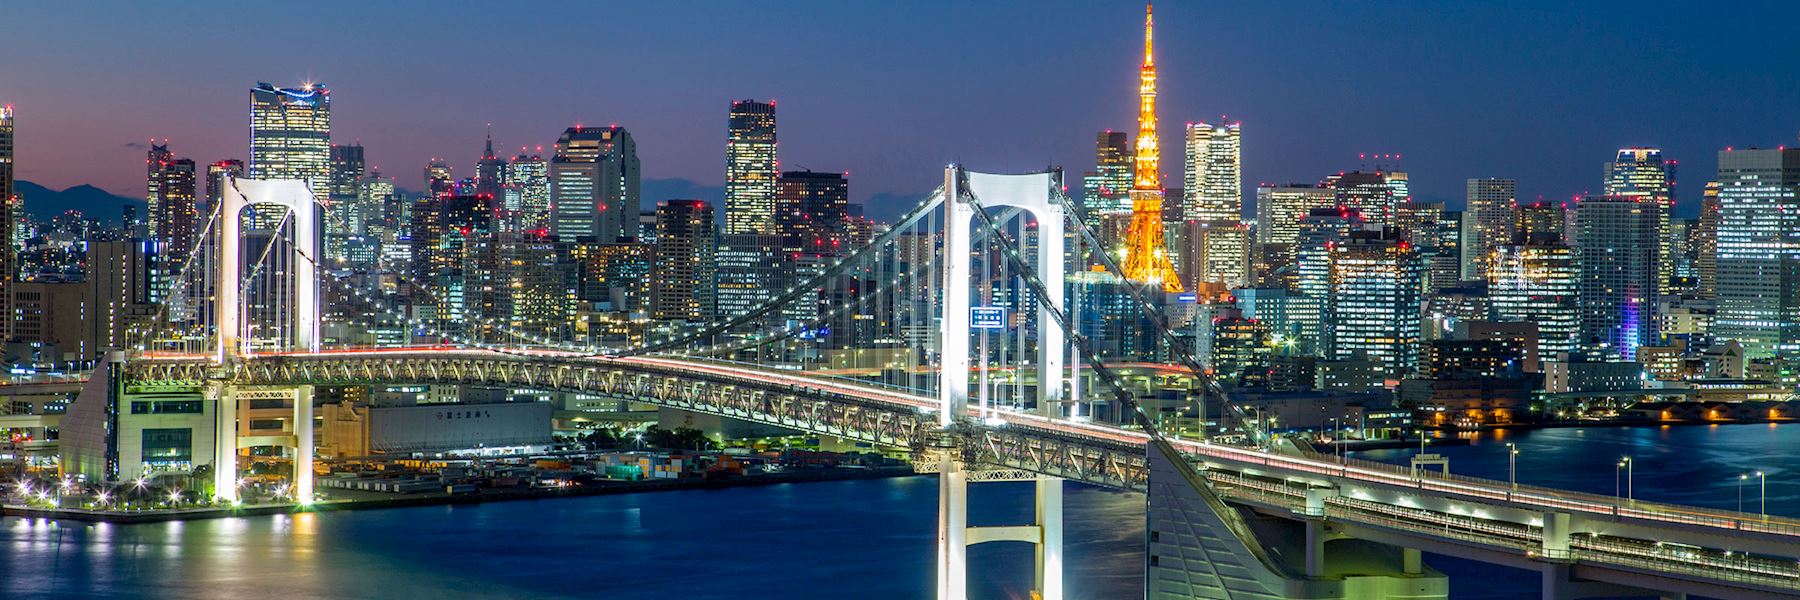 Visit Tokyo on a trip to Japan | Audley Travel